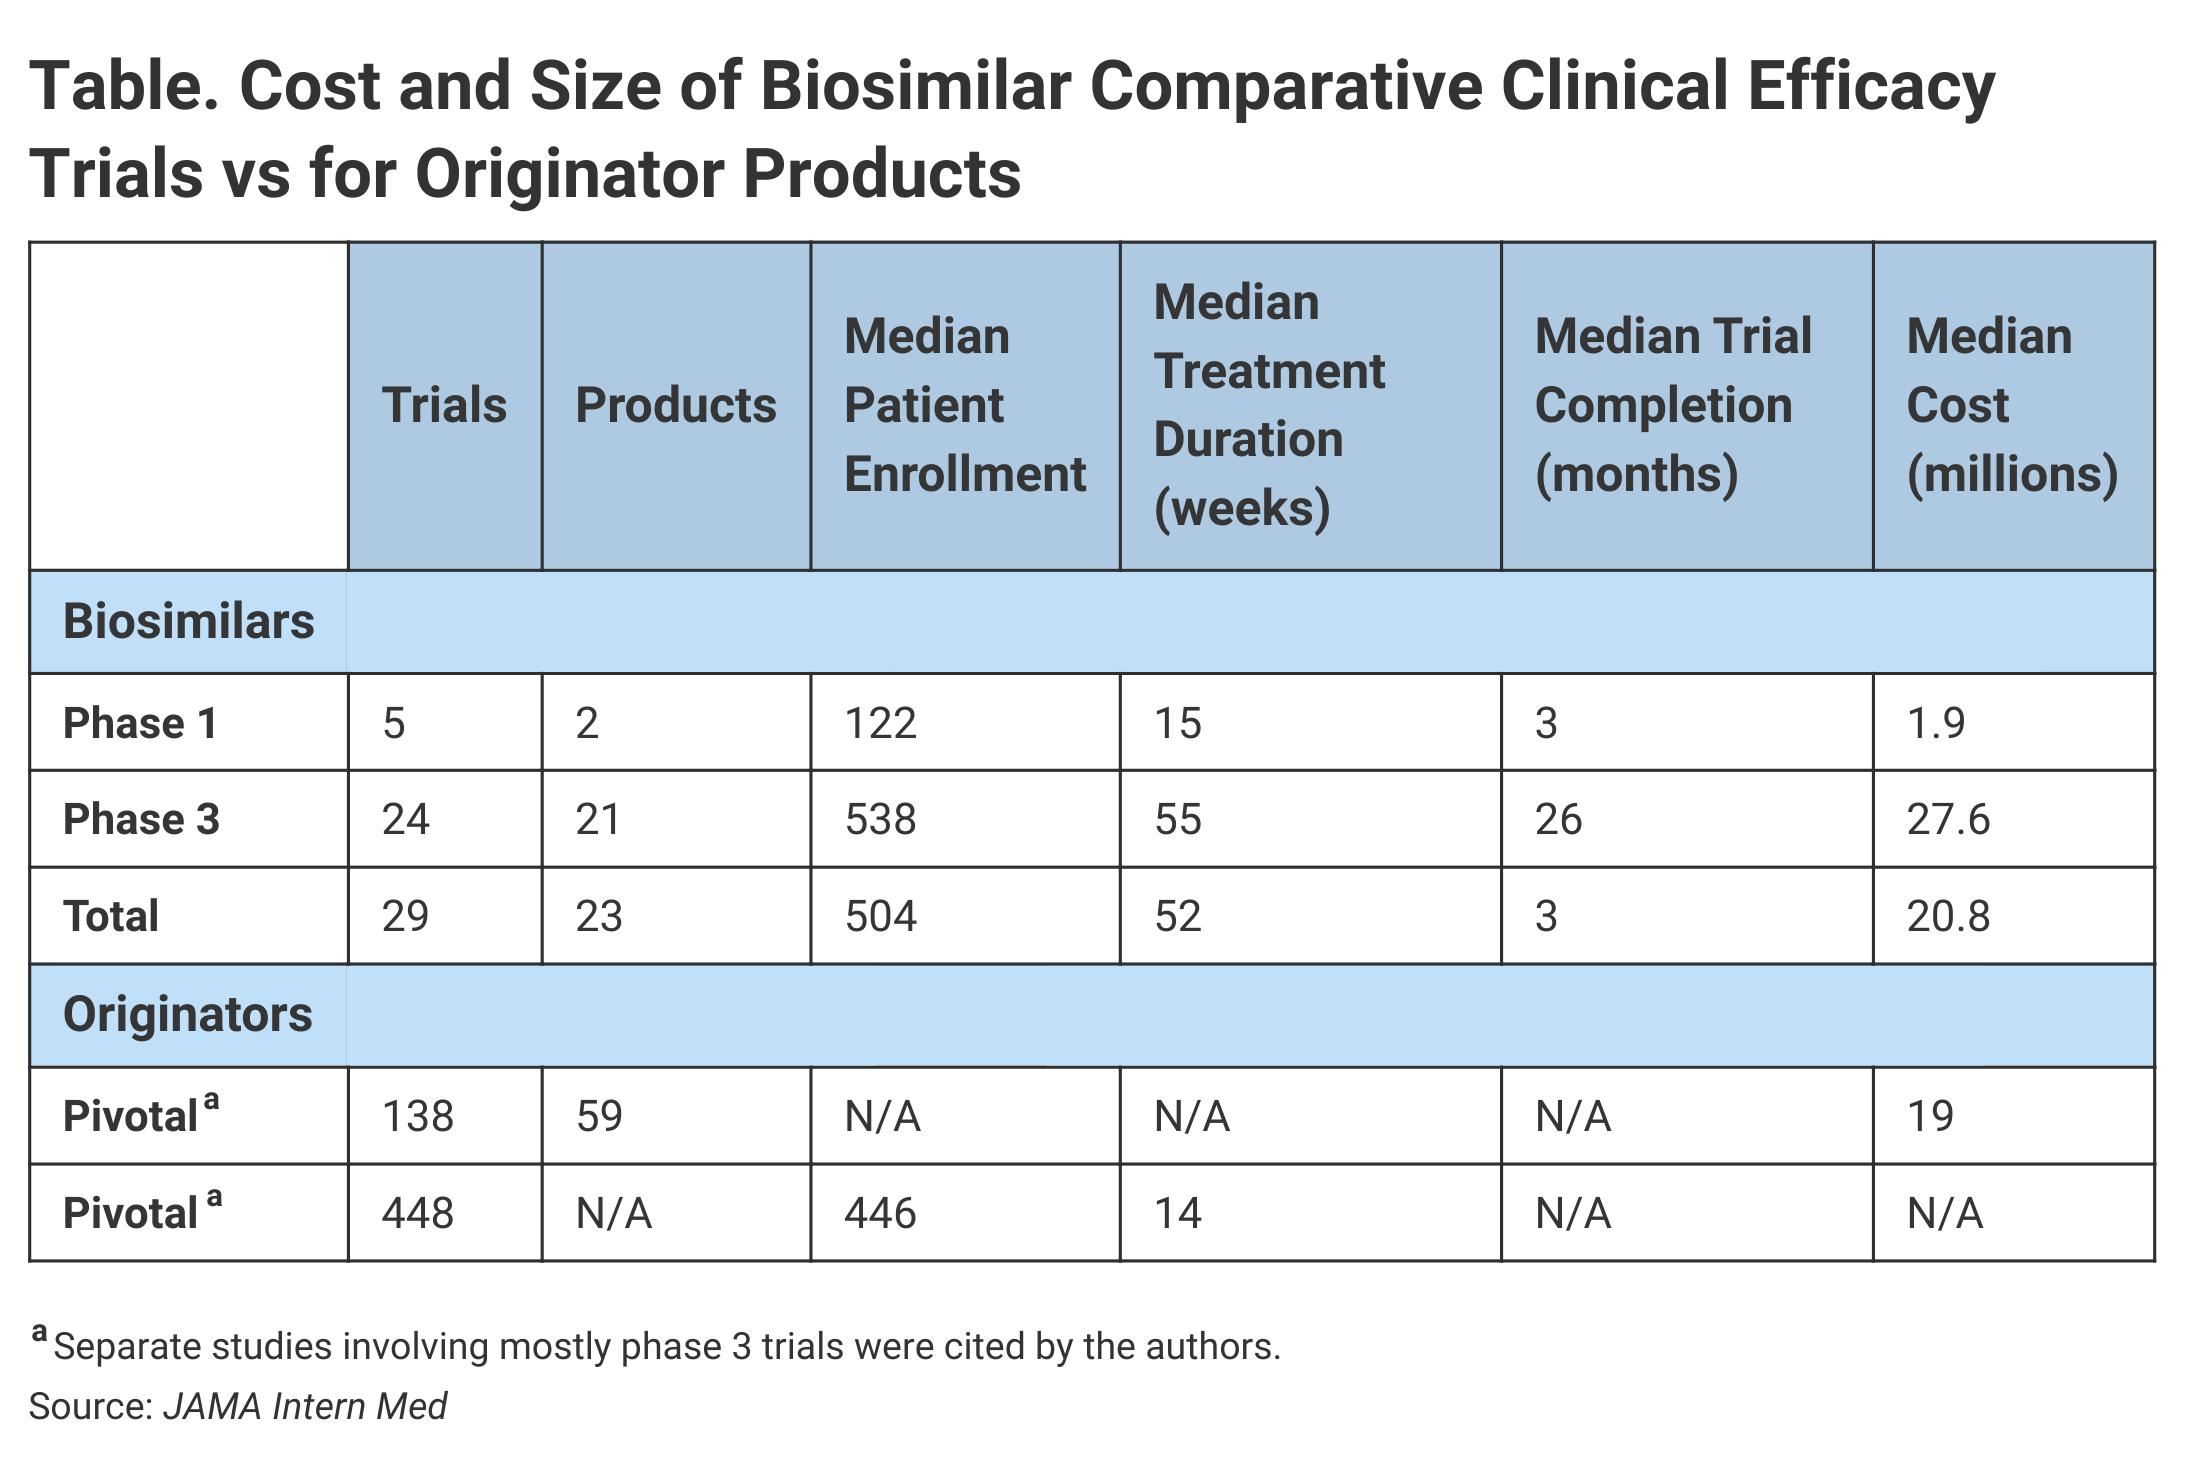 Table. Cost and Size of Biosimilar Comparative Clinical Efficacy Trials vs for Originator Products